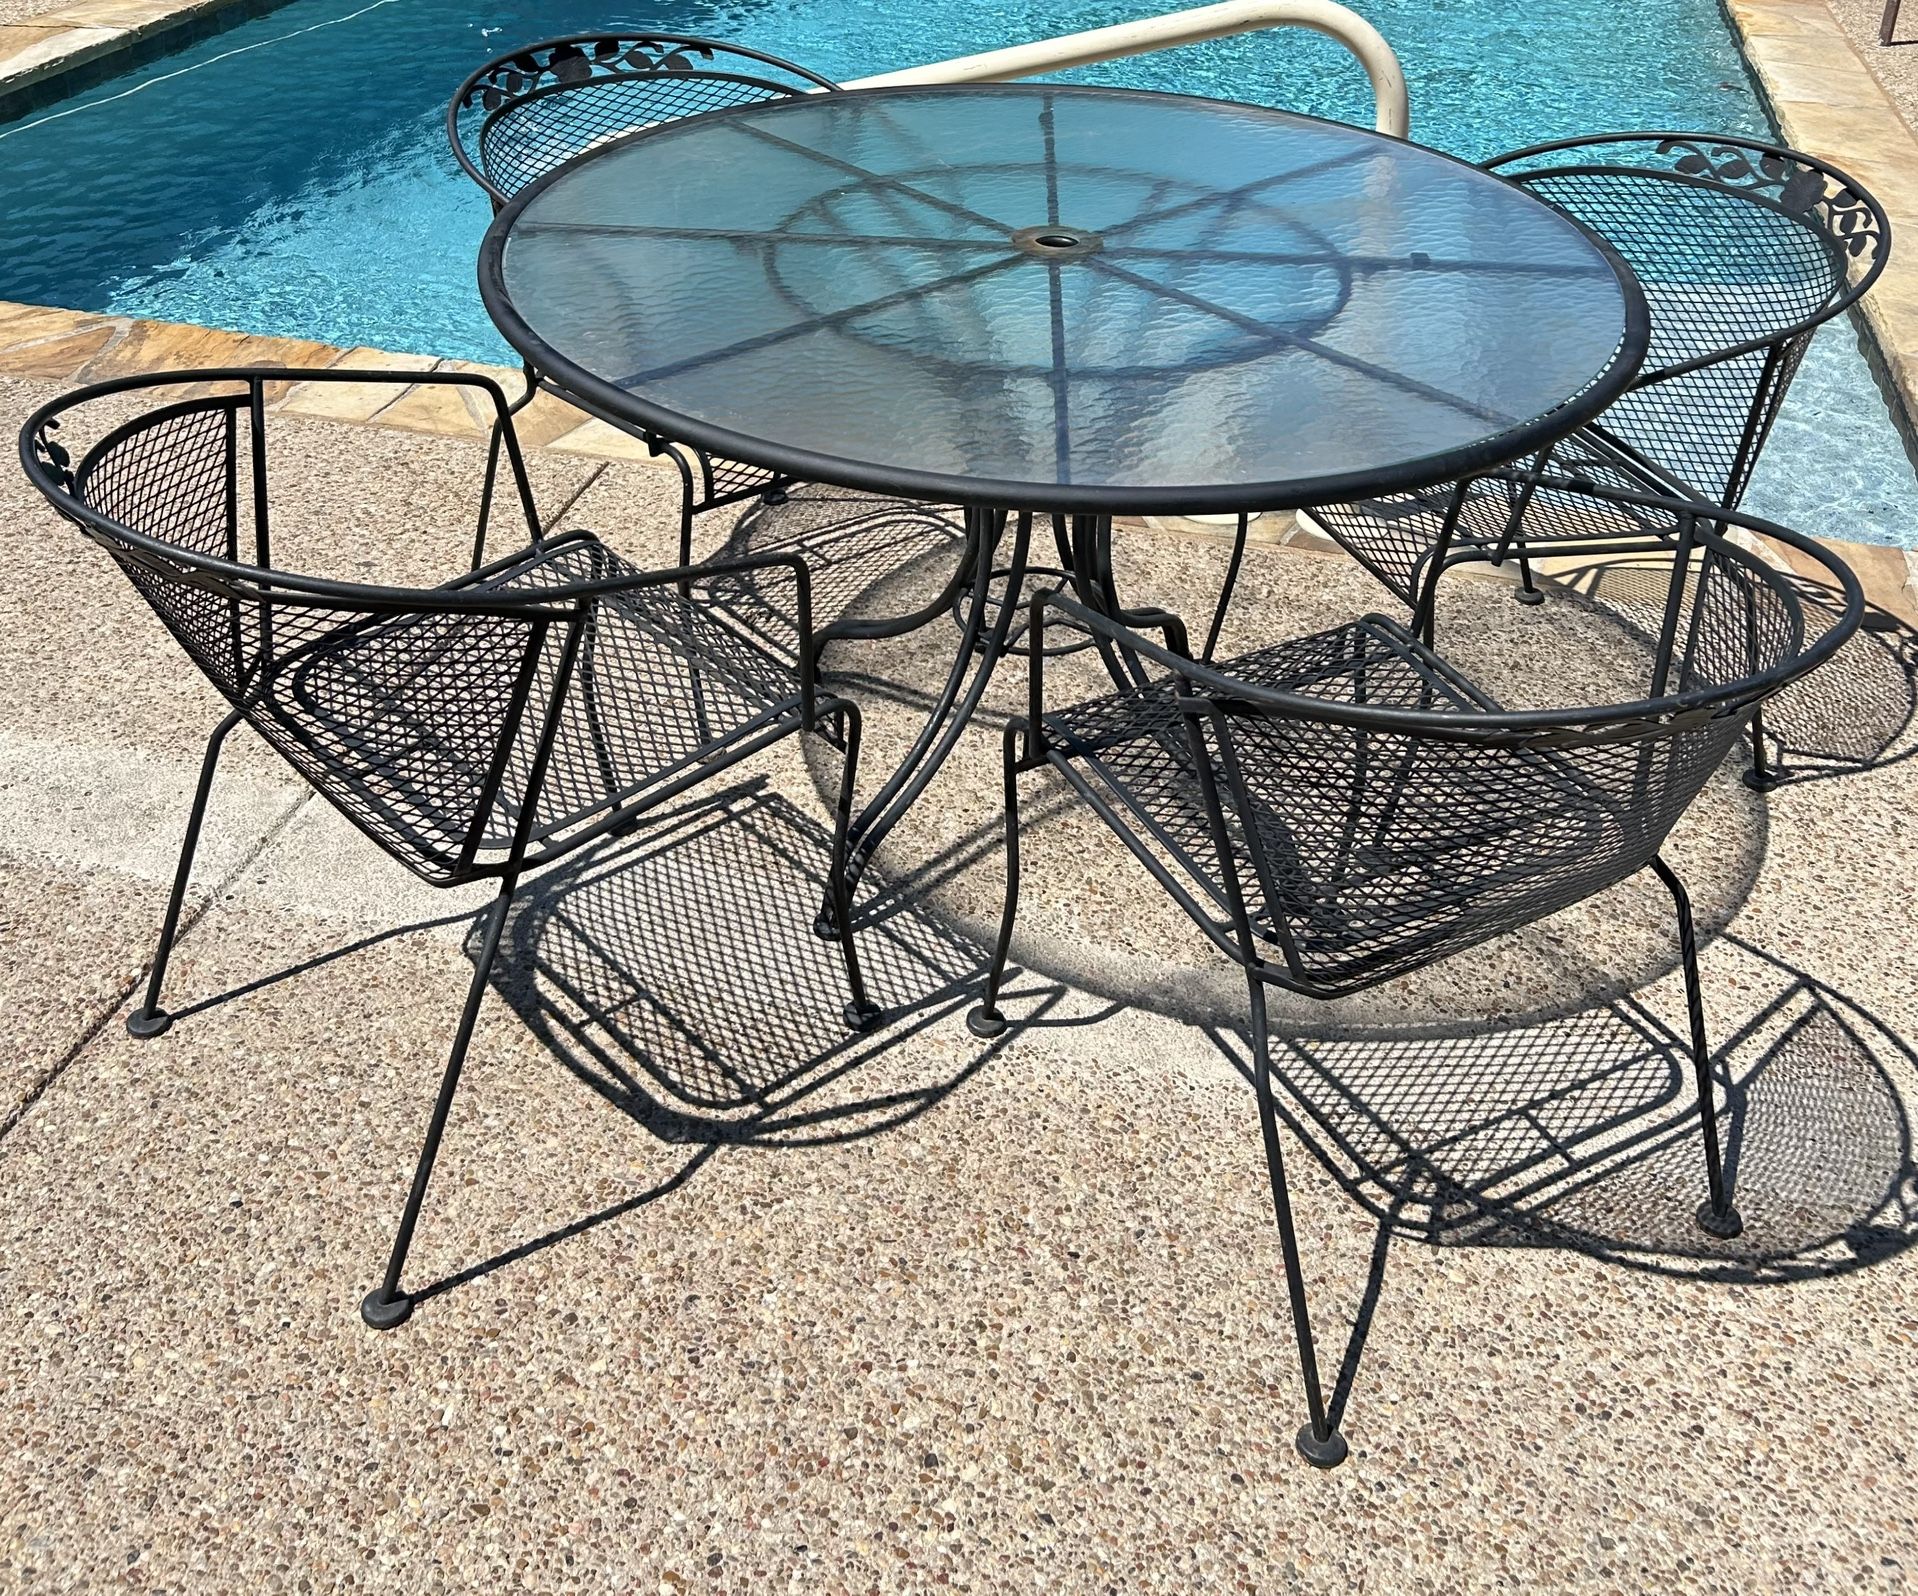 Wrought Iron Patio Table with 4 Garden Chairs